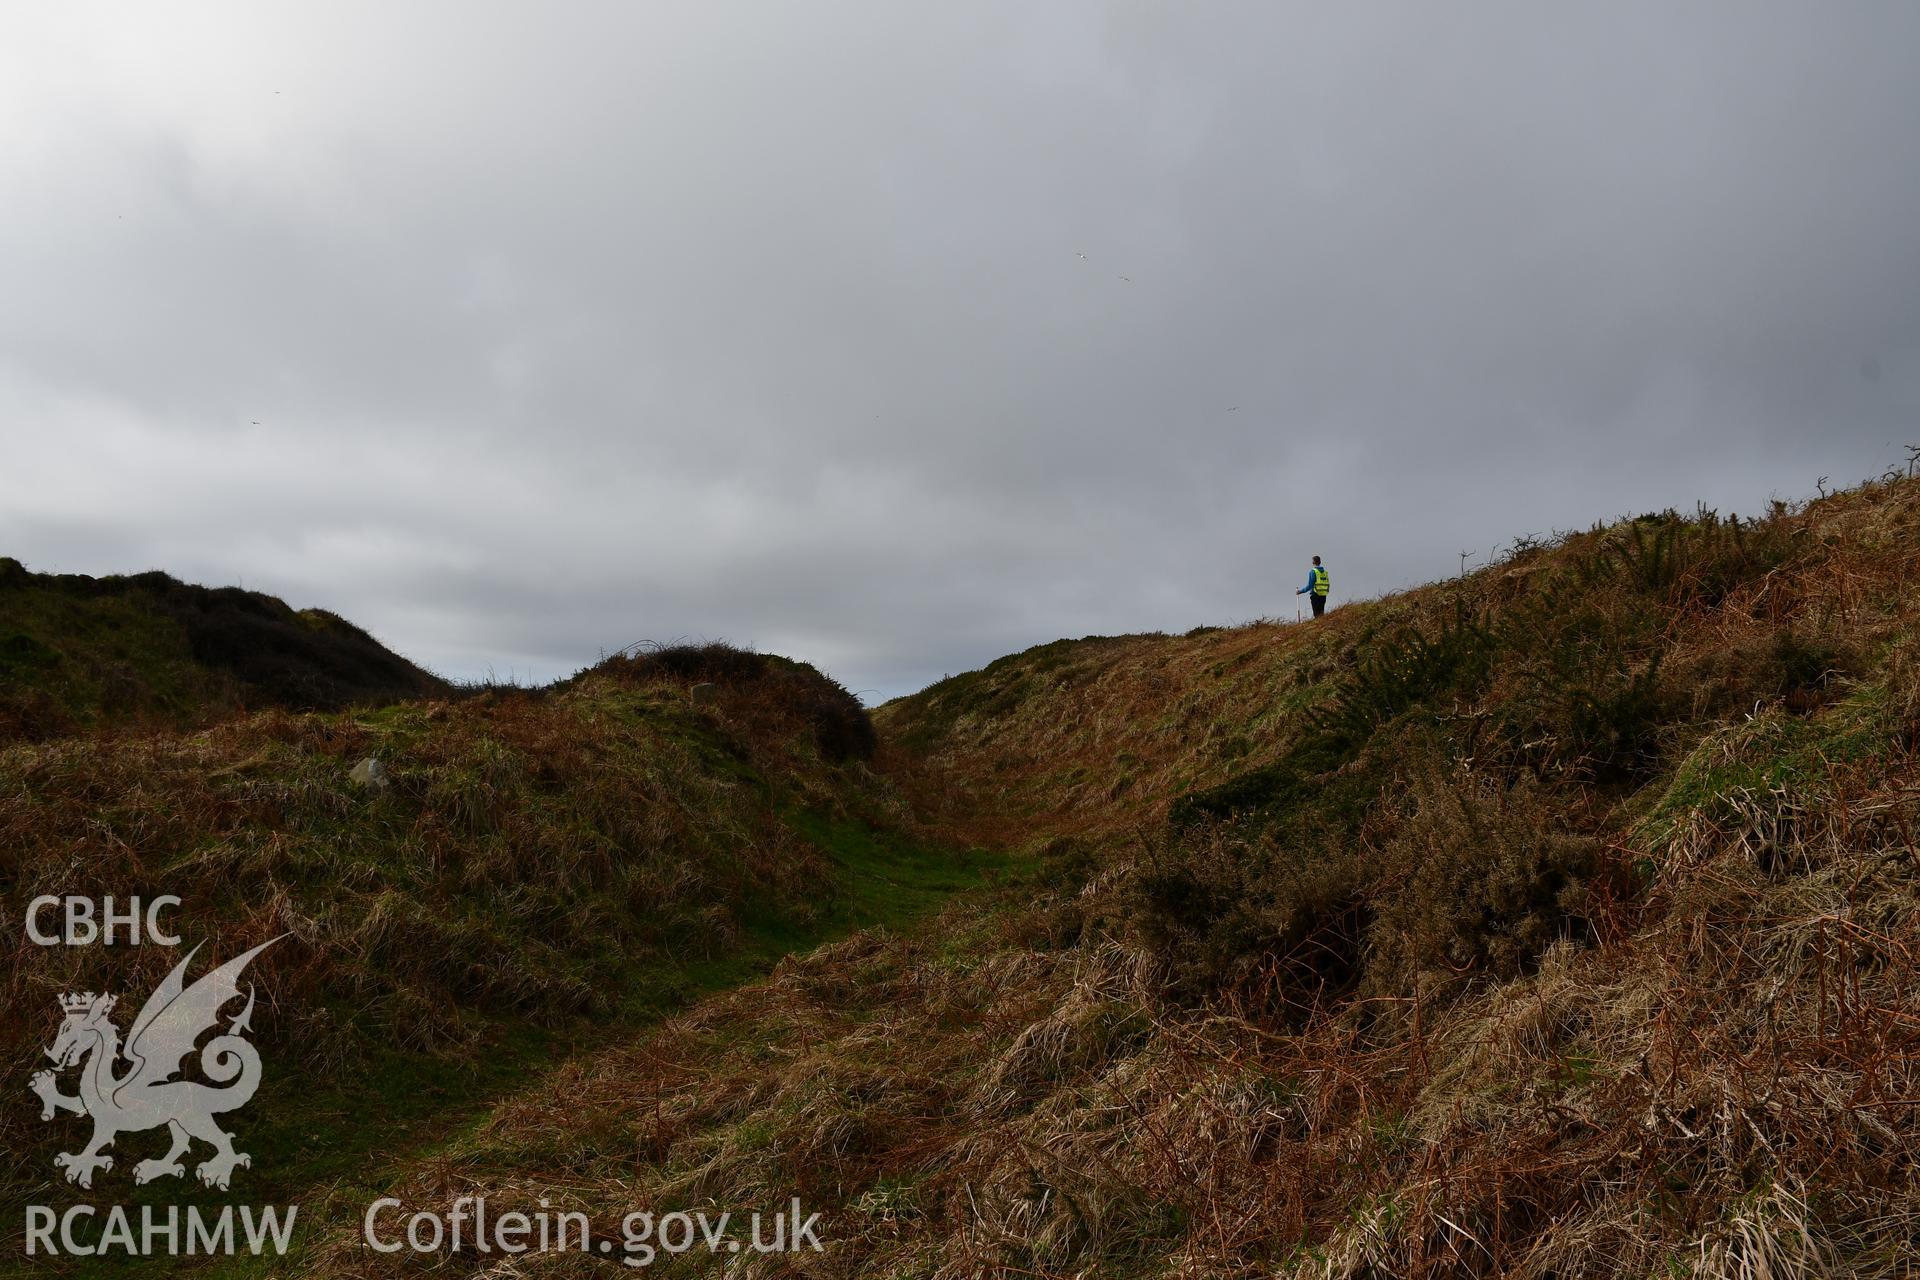 Ramparts and ditches. Person and 1m scale. Camera facing W. Taken by Hannah Genders Boyd. Produced with EU funds through the Ireland Wales Co-operation Programme 2014-2023. All material made freely available through the Open Government Licence.